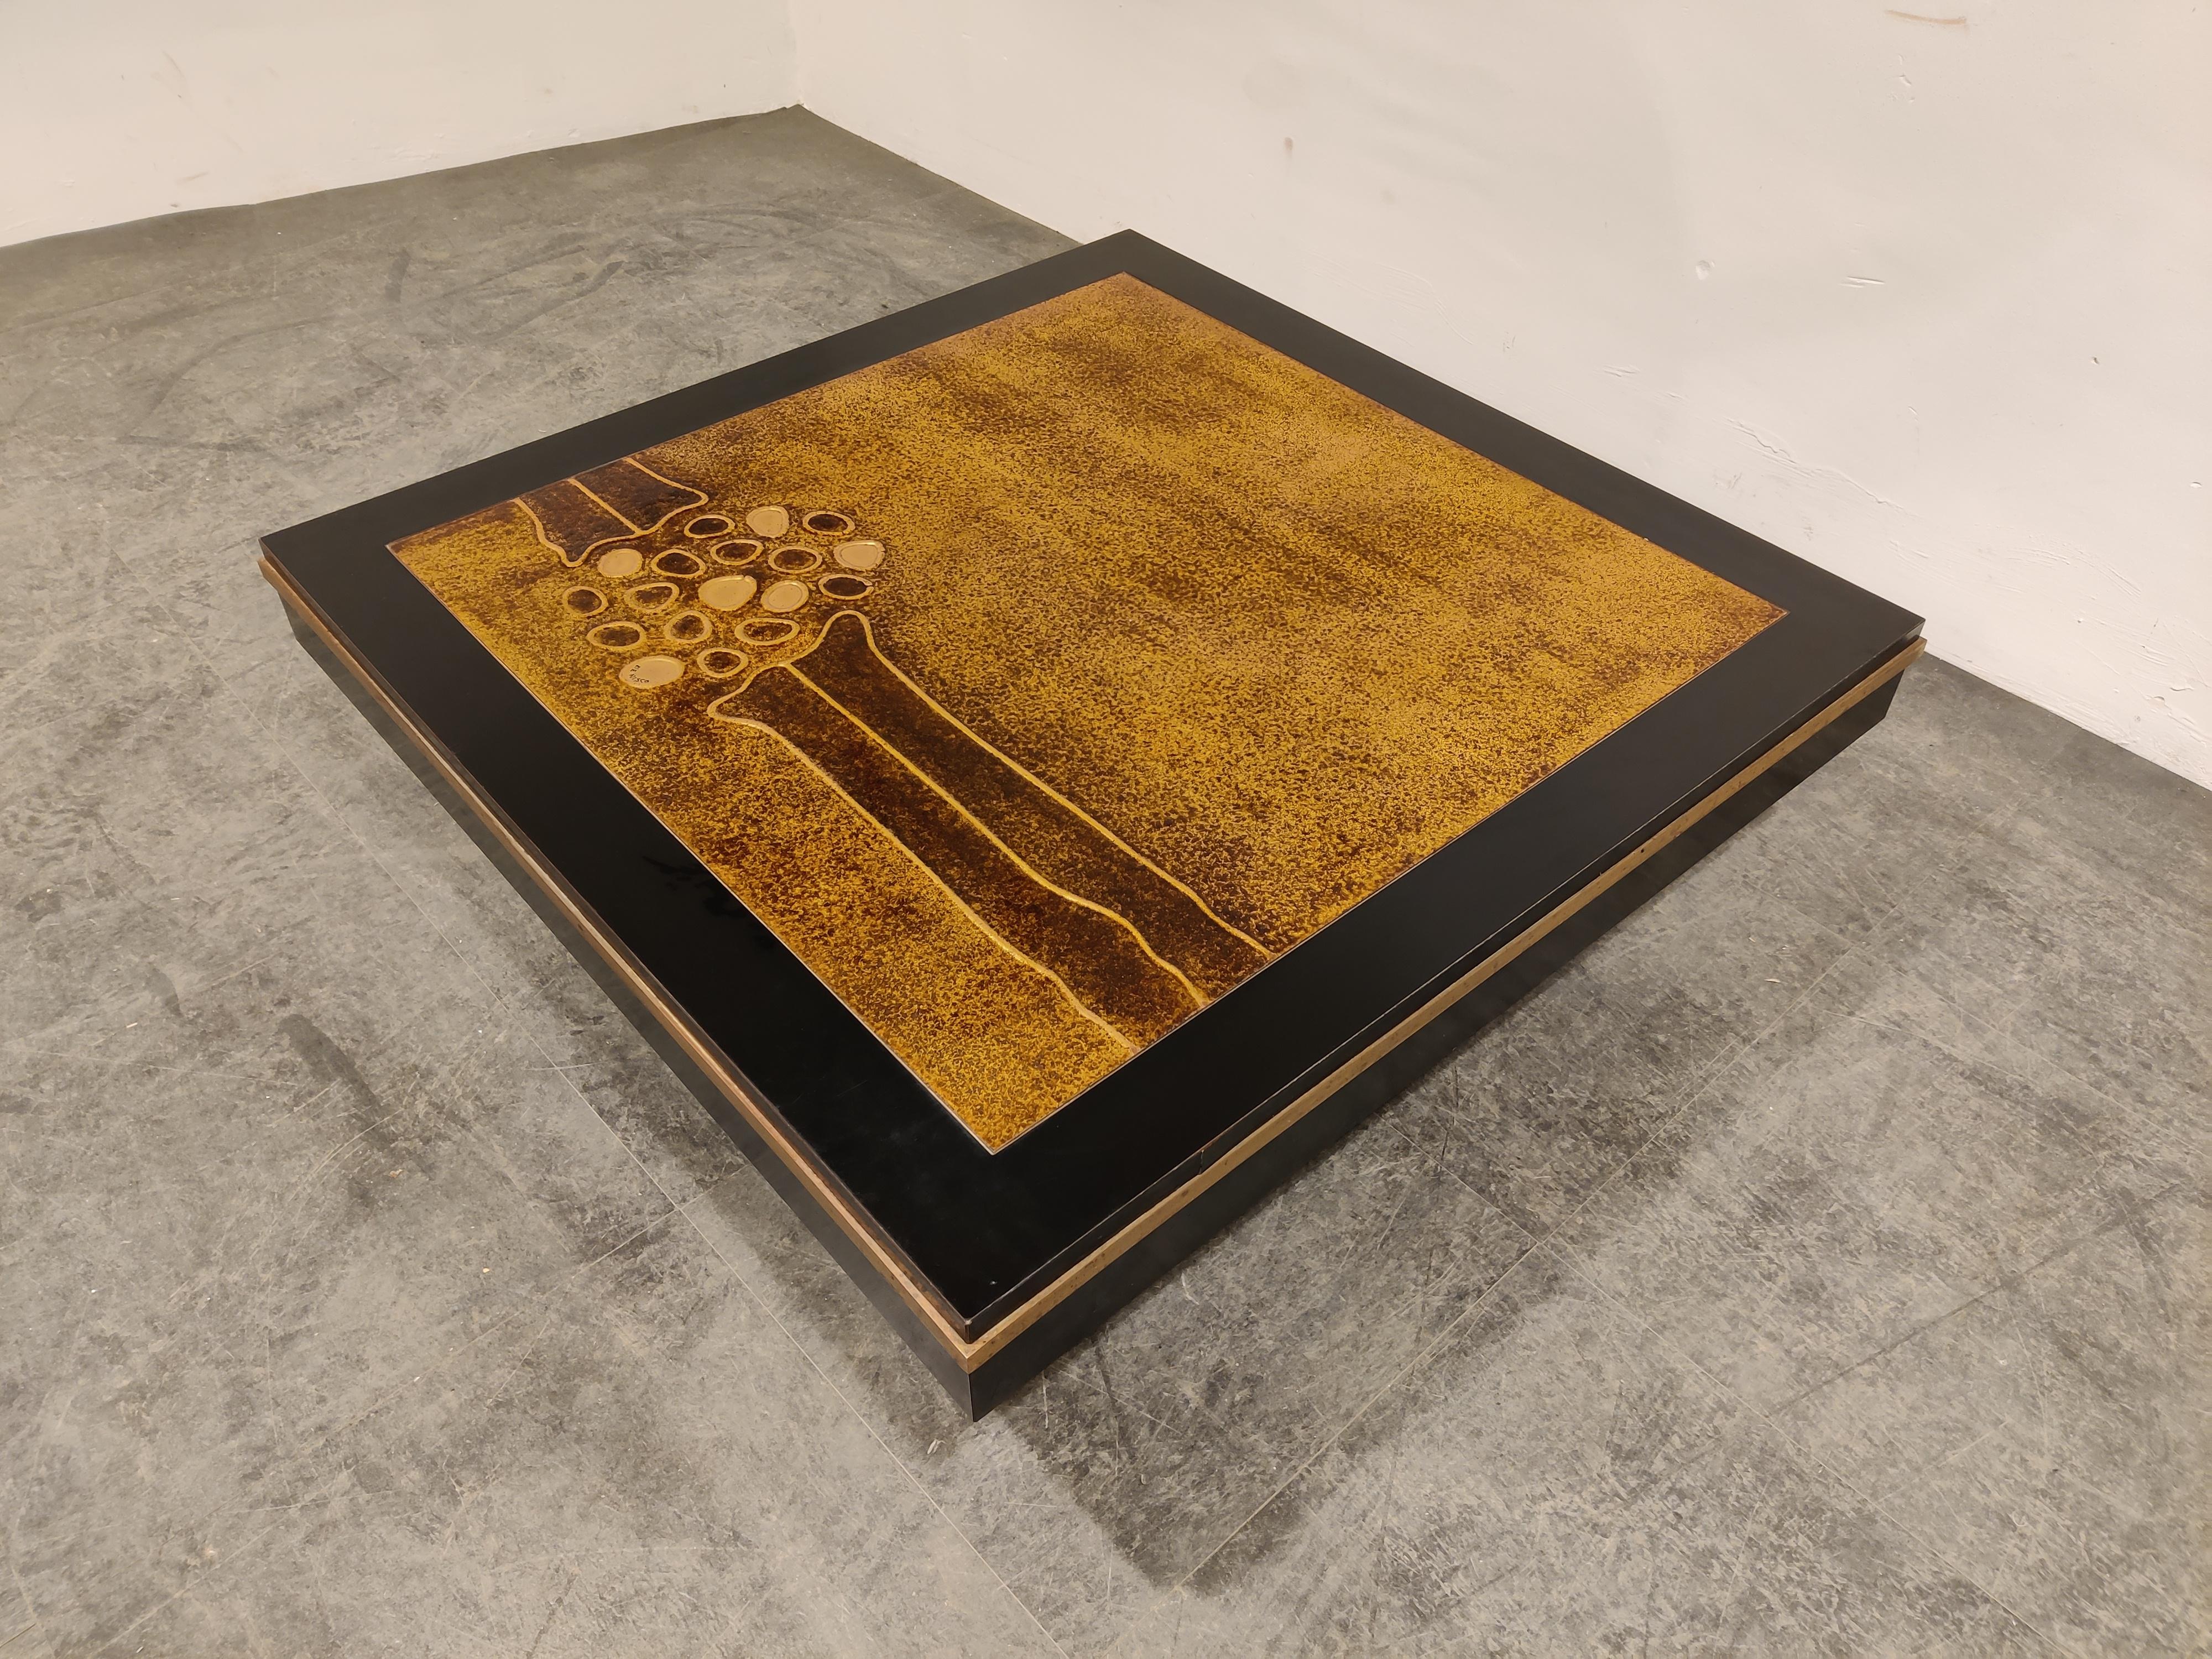 Mid-Century Modernist coffee table by Denisco.

The table consists of a lacquered wooden base with a single ceramic modernist design piece.

Overall good condition, small damage to one of the lacquered edges.

1960s - Belgium

Good